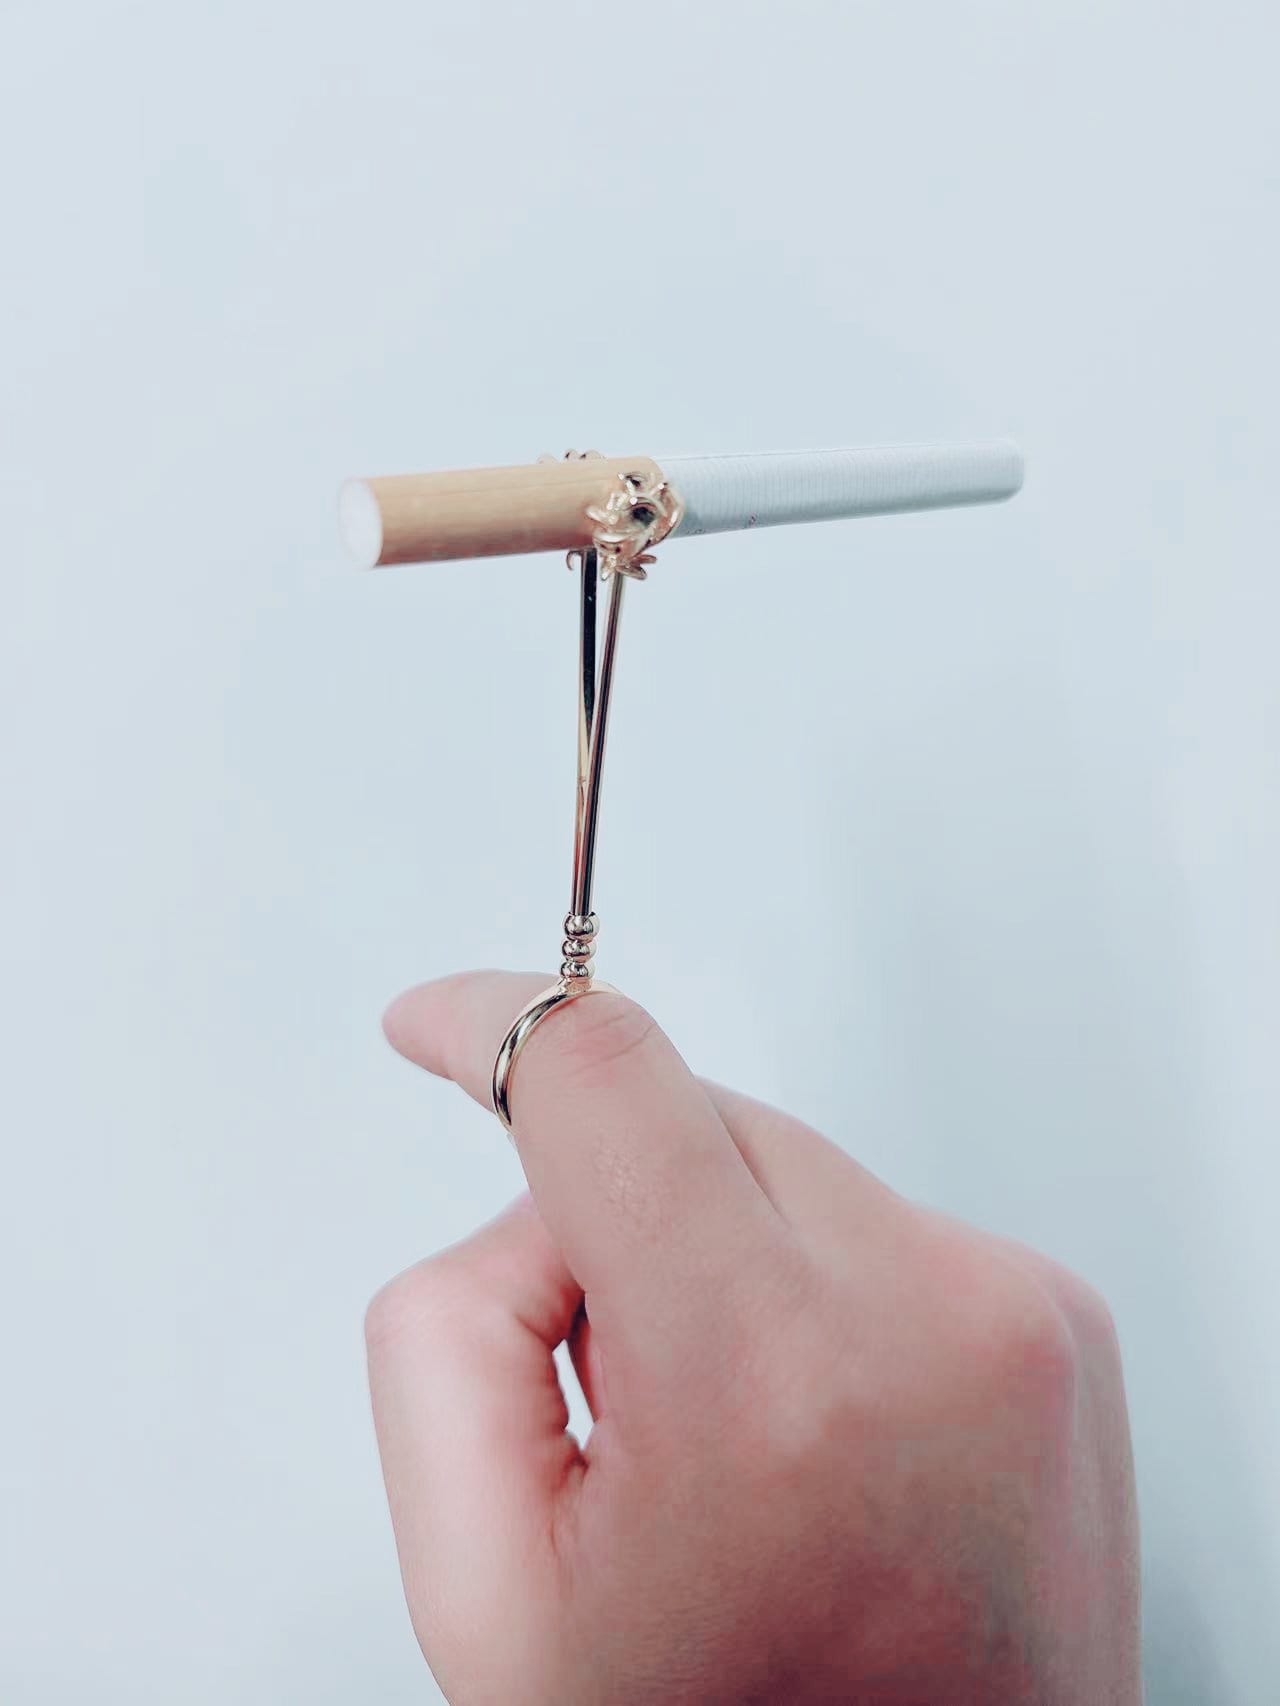 1pc Creative Smoker's Ring With Cigarette Holder, Hip-hop Style